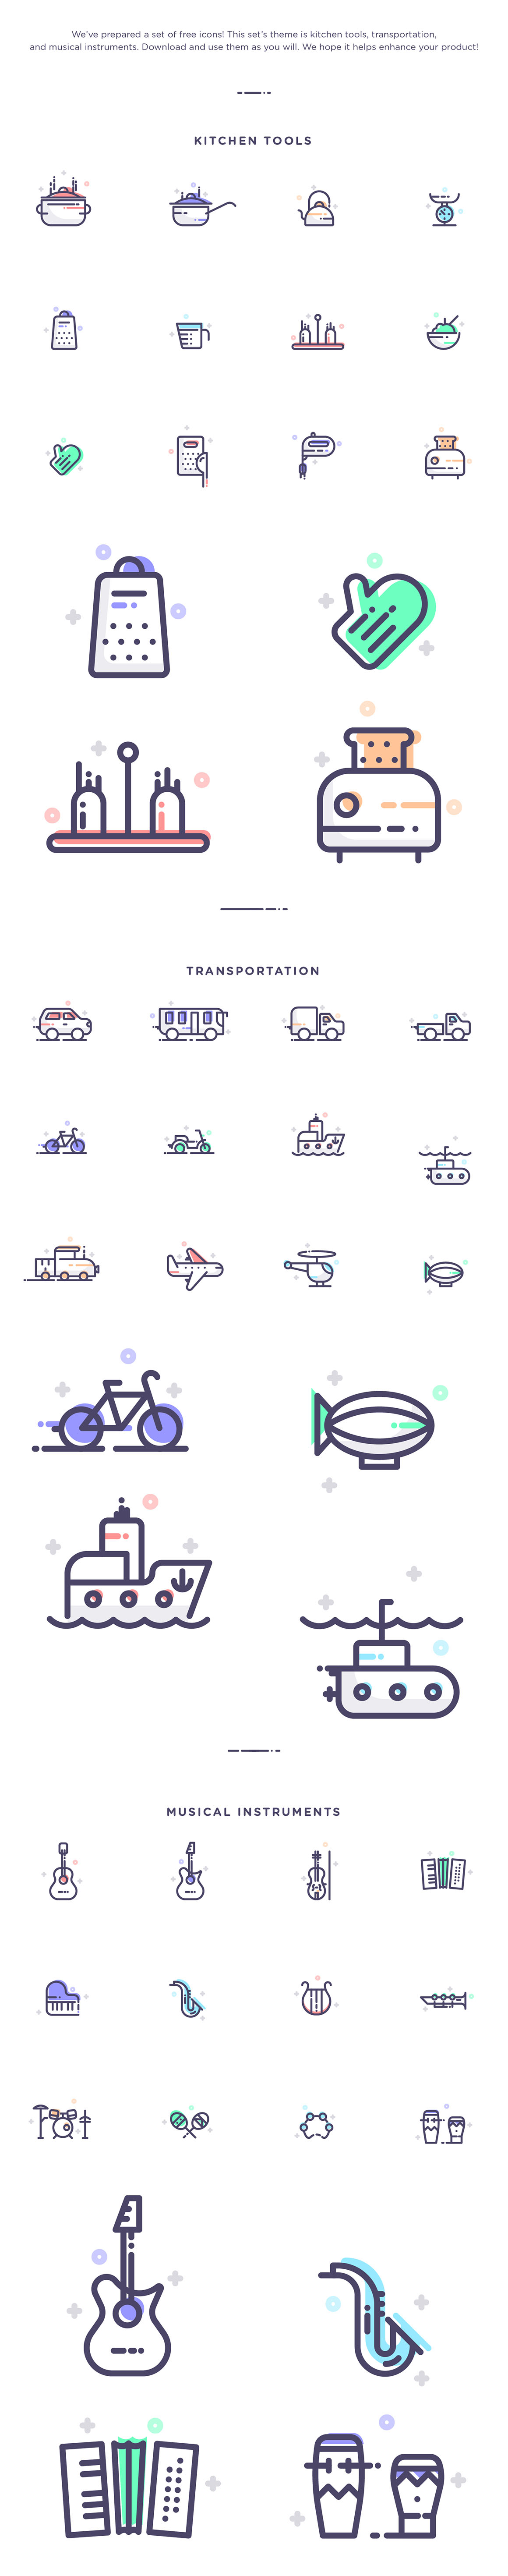 svg icon pack